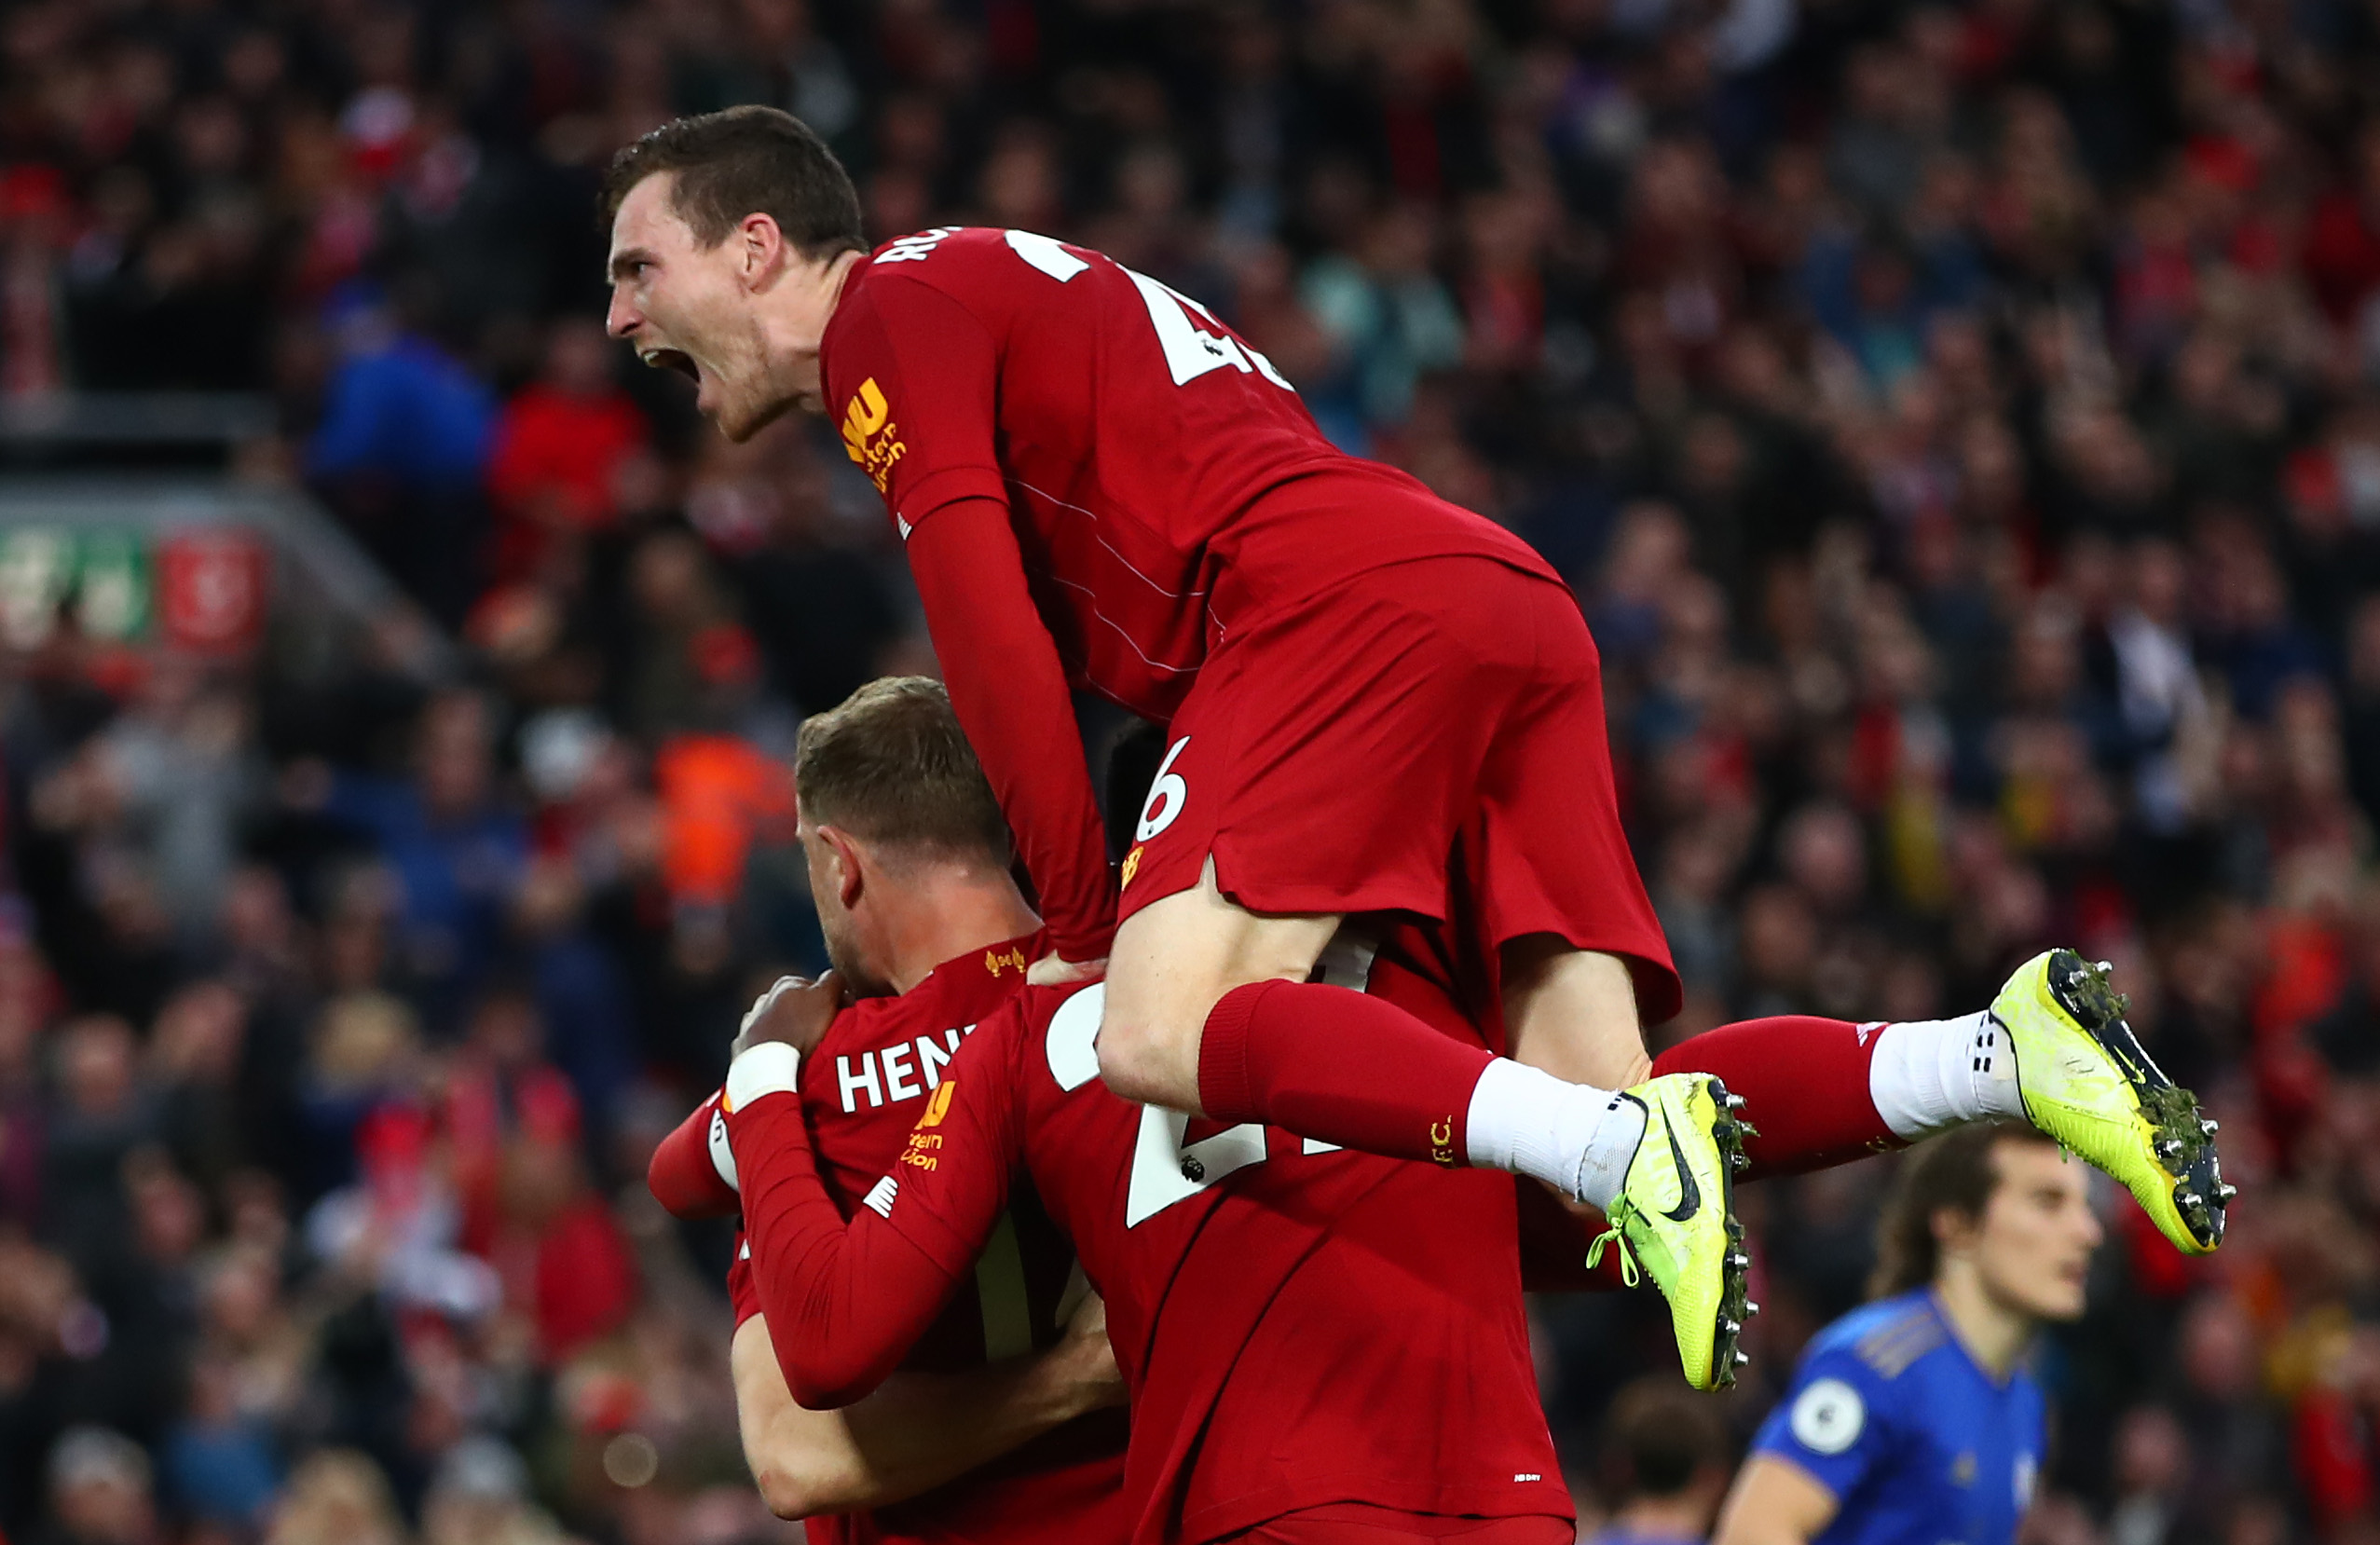 Liverpool face Leicester on Boxing Day